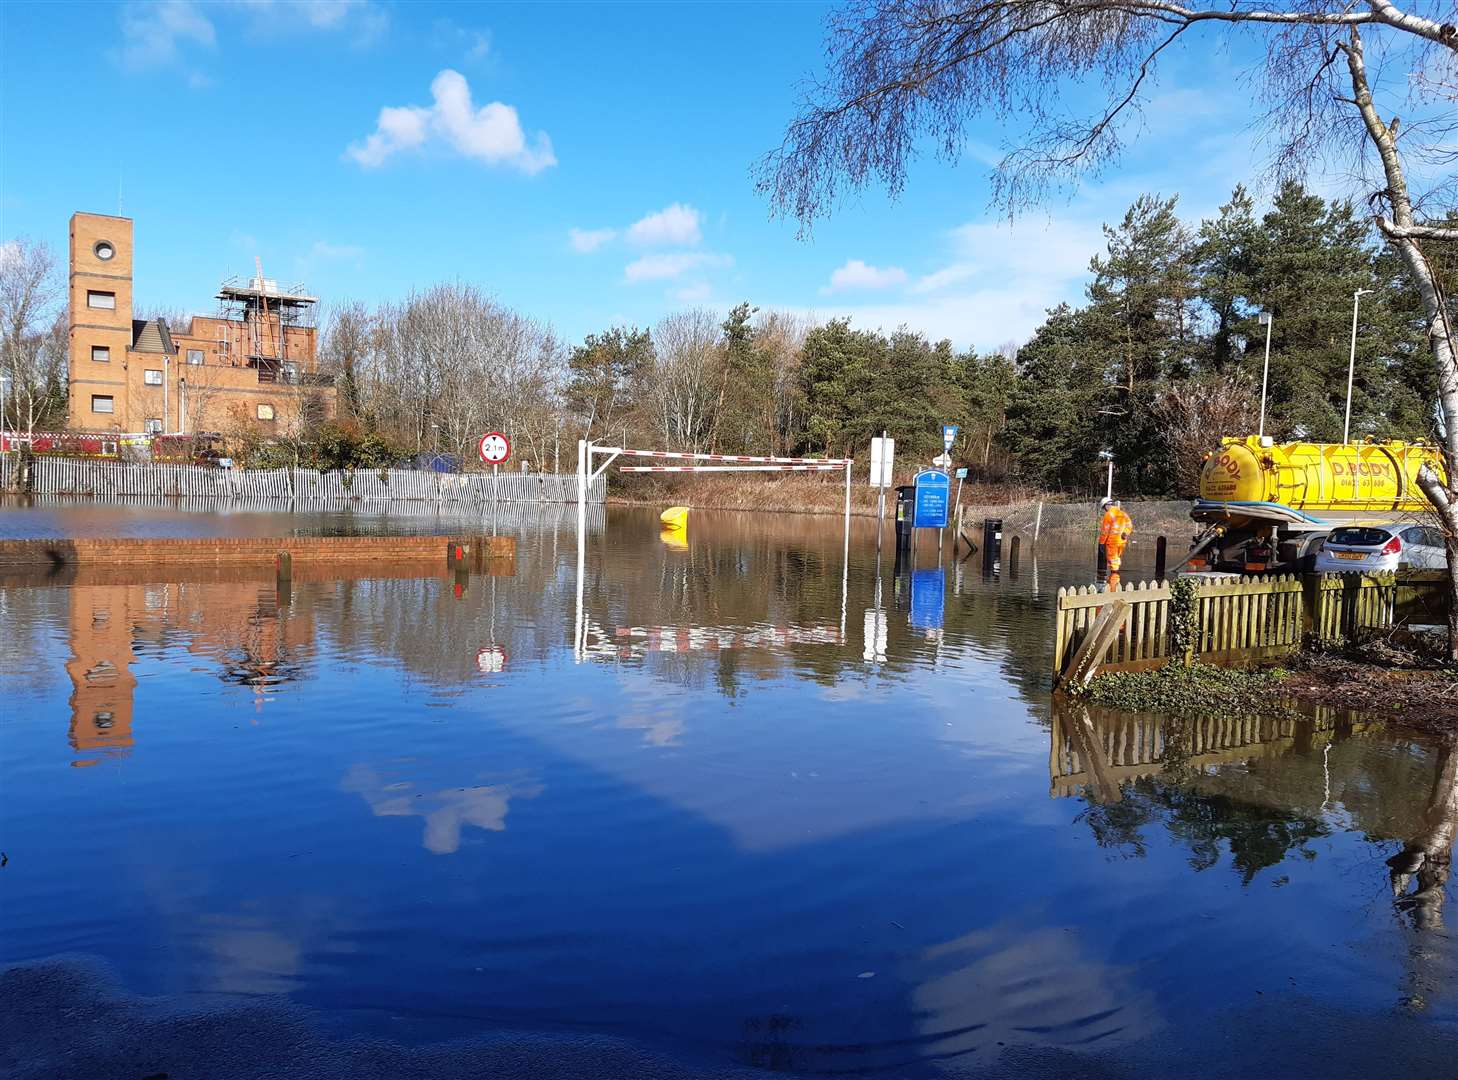 The Henwood car park, owned by Ashford Borough Council, is flooded